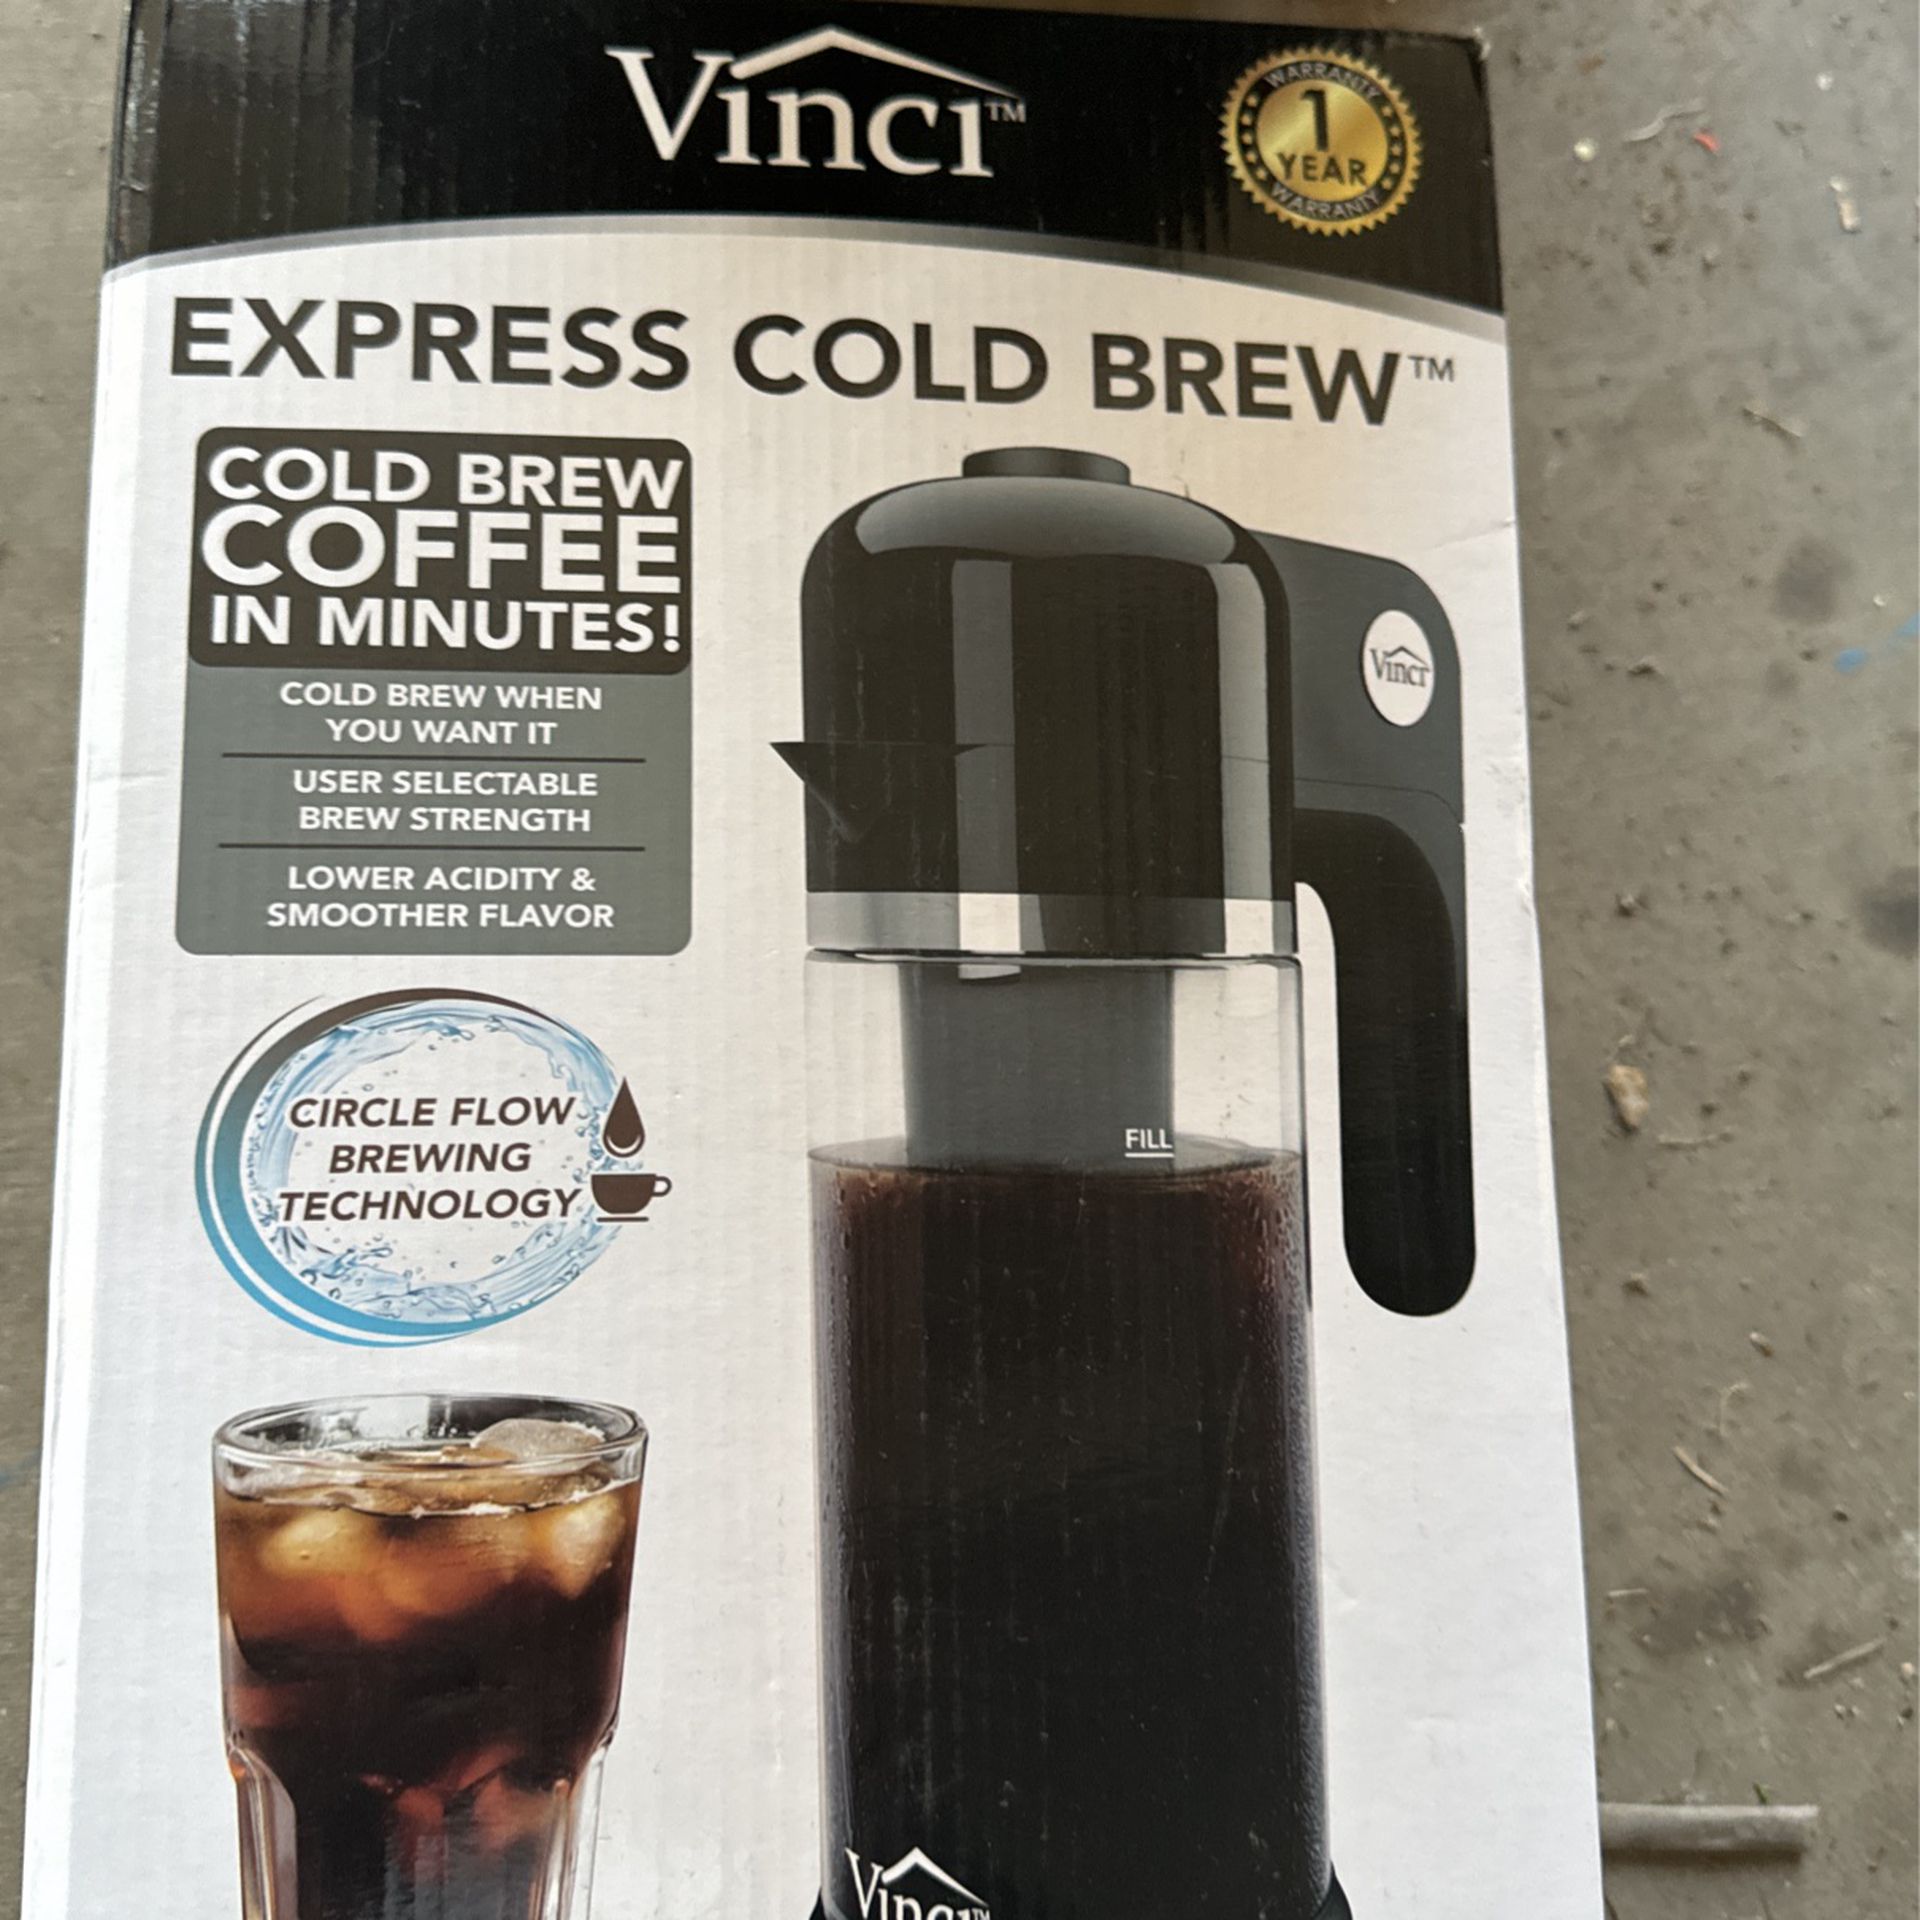 Express Cold Brew